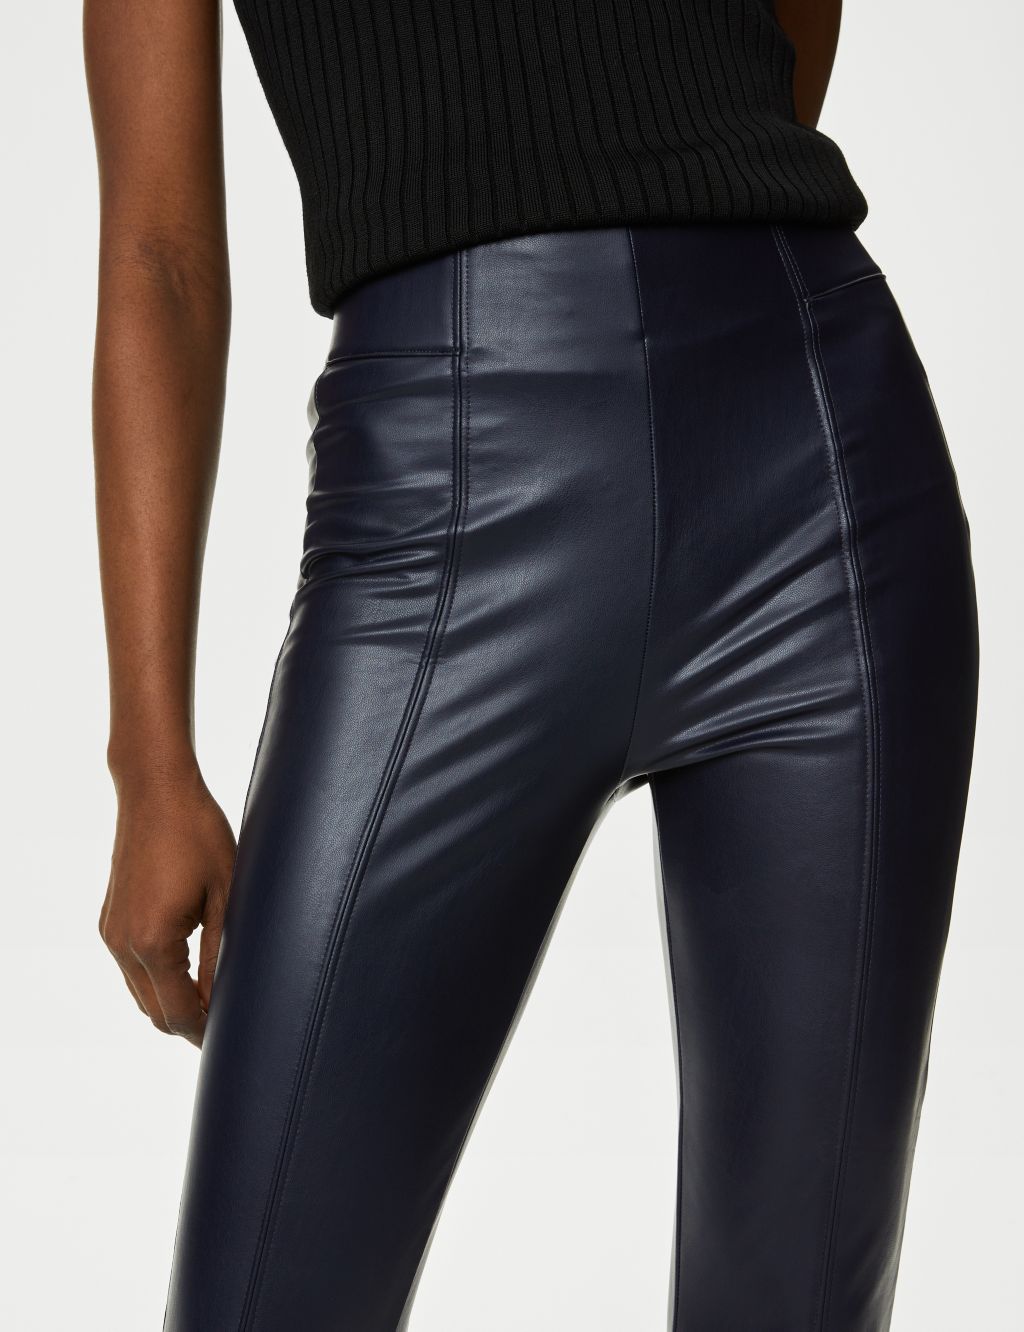 Leather Look High Waisted Leggings image 4